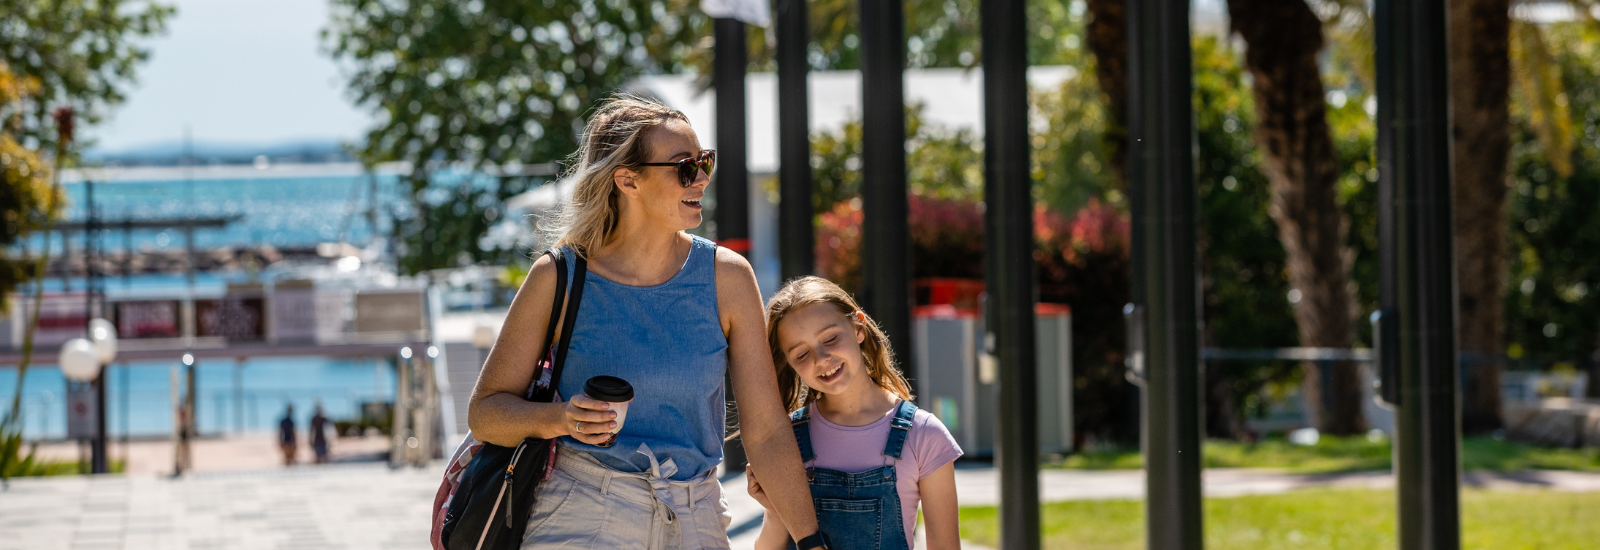 Mum and daughter walking through park in Nelson Bay banner image